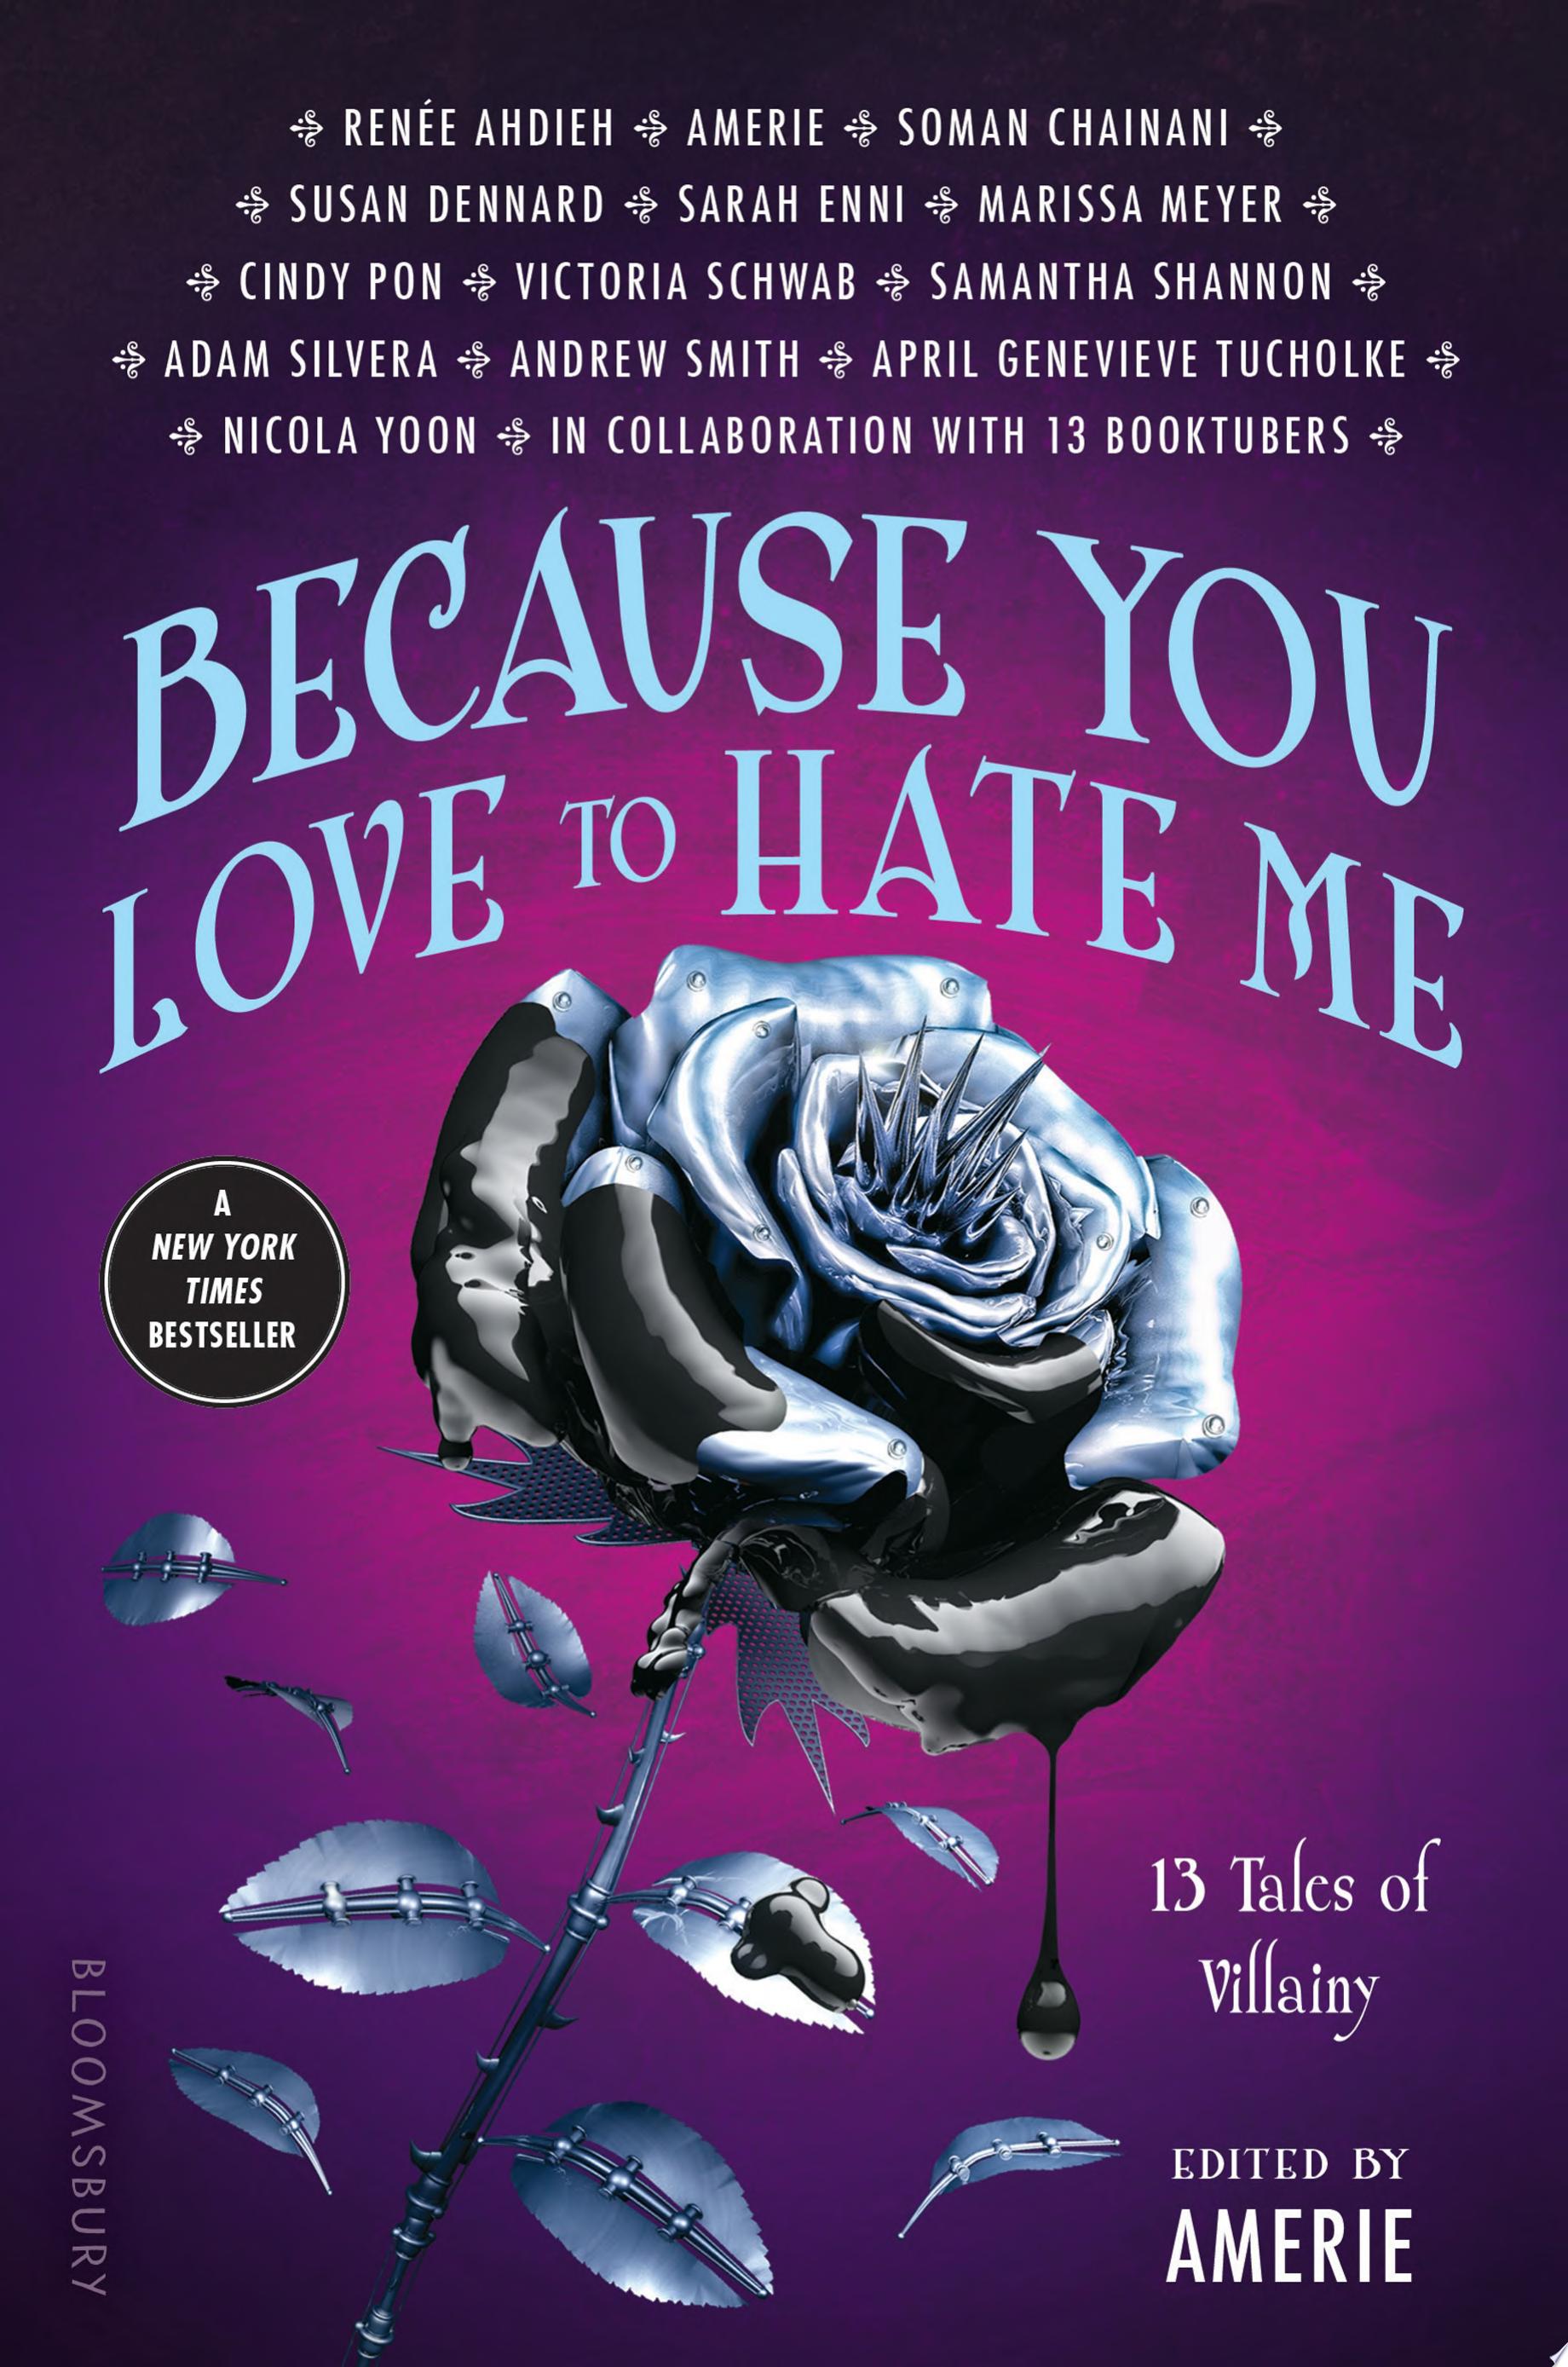 Image for "Because You Love to Hate Me"